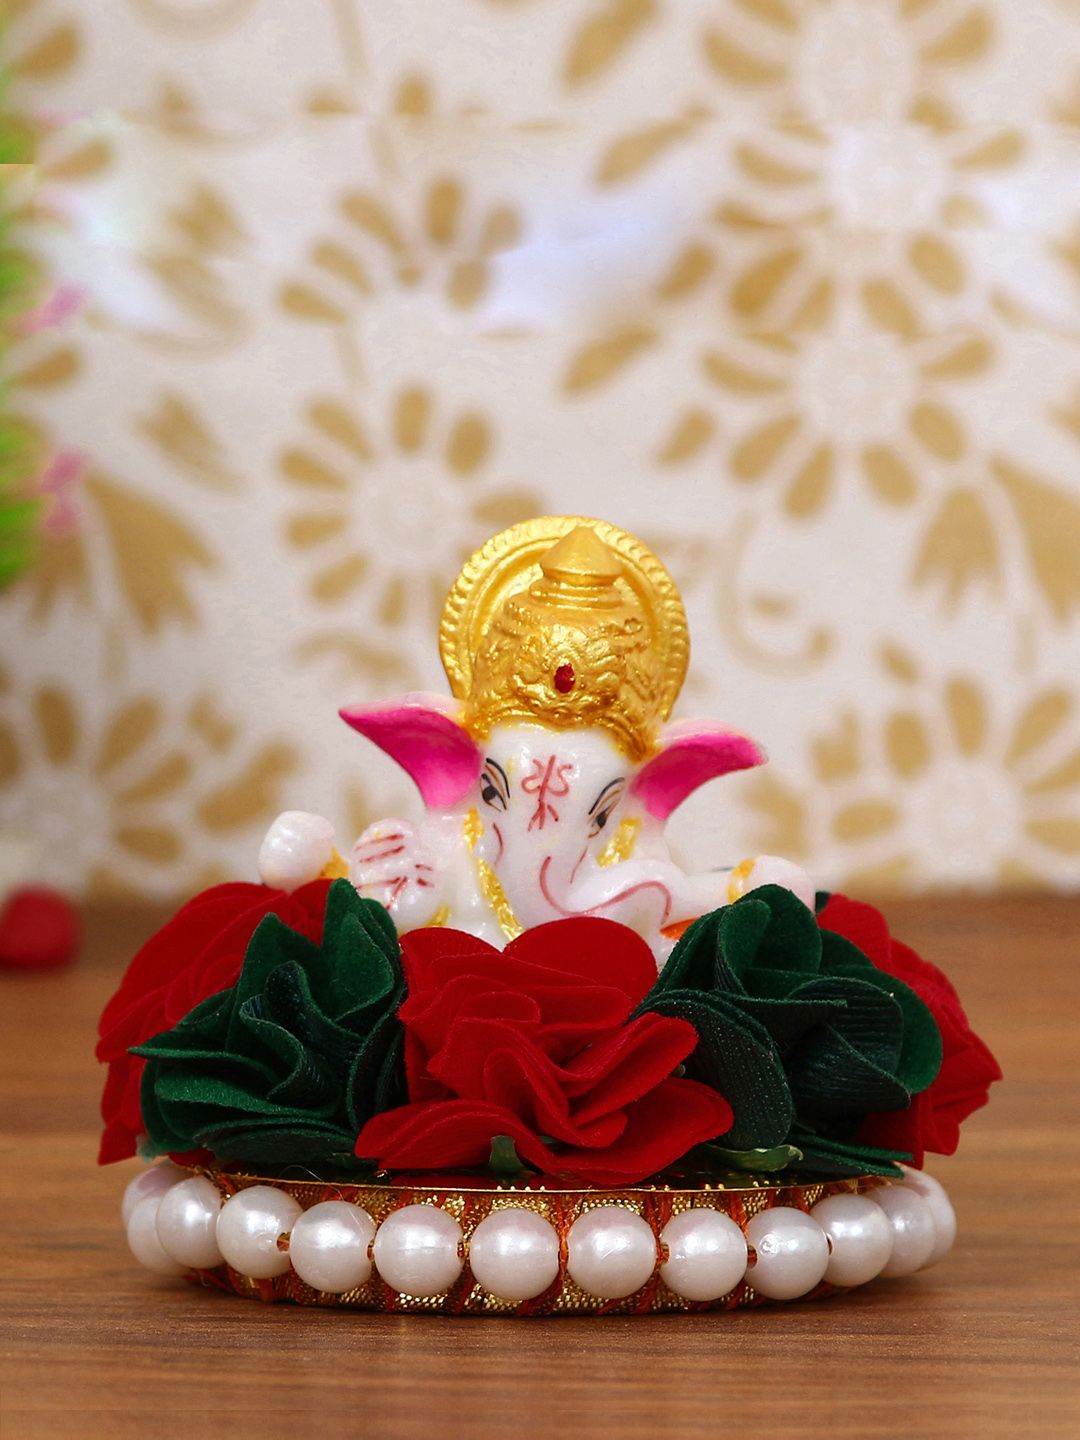 eCraftIndia Red & White Handcrafted Lord Ganesha On Decorative Plate With Flowers Showpiece Price in India